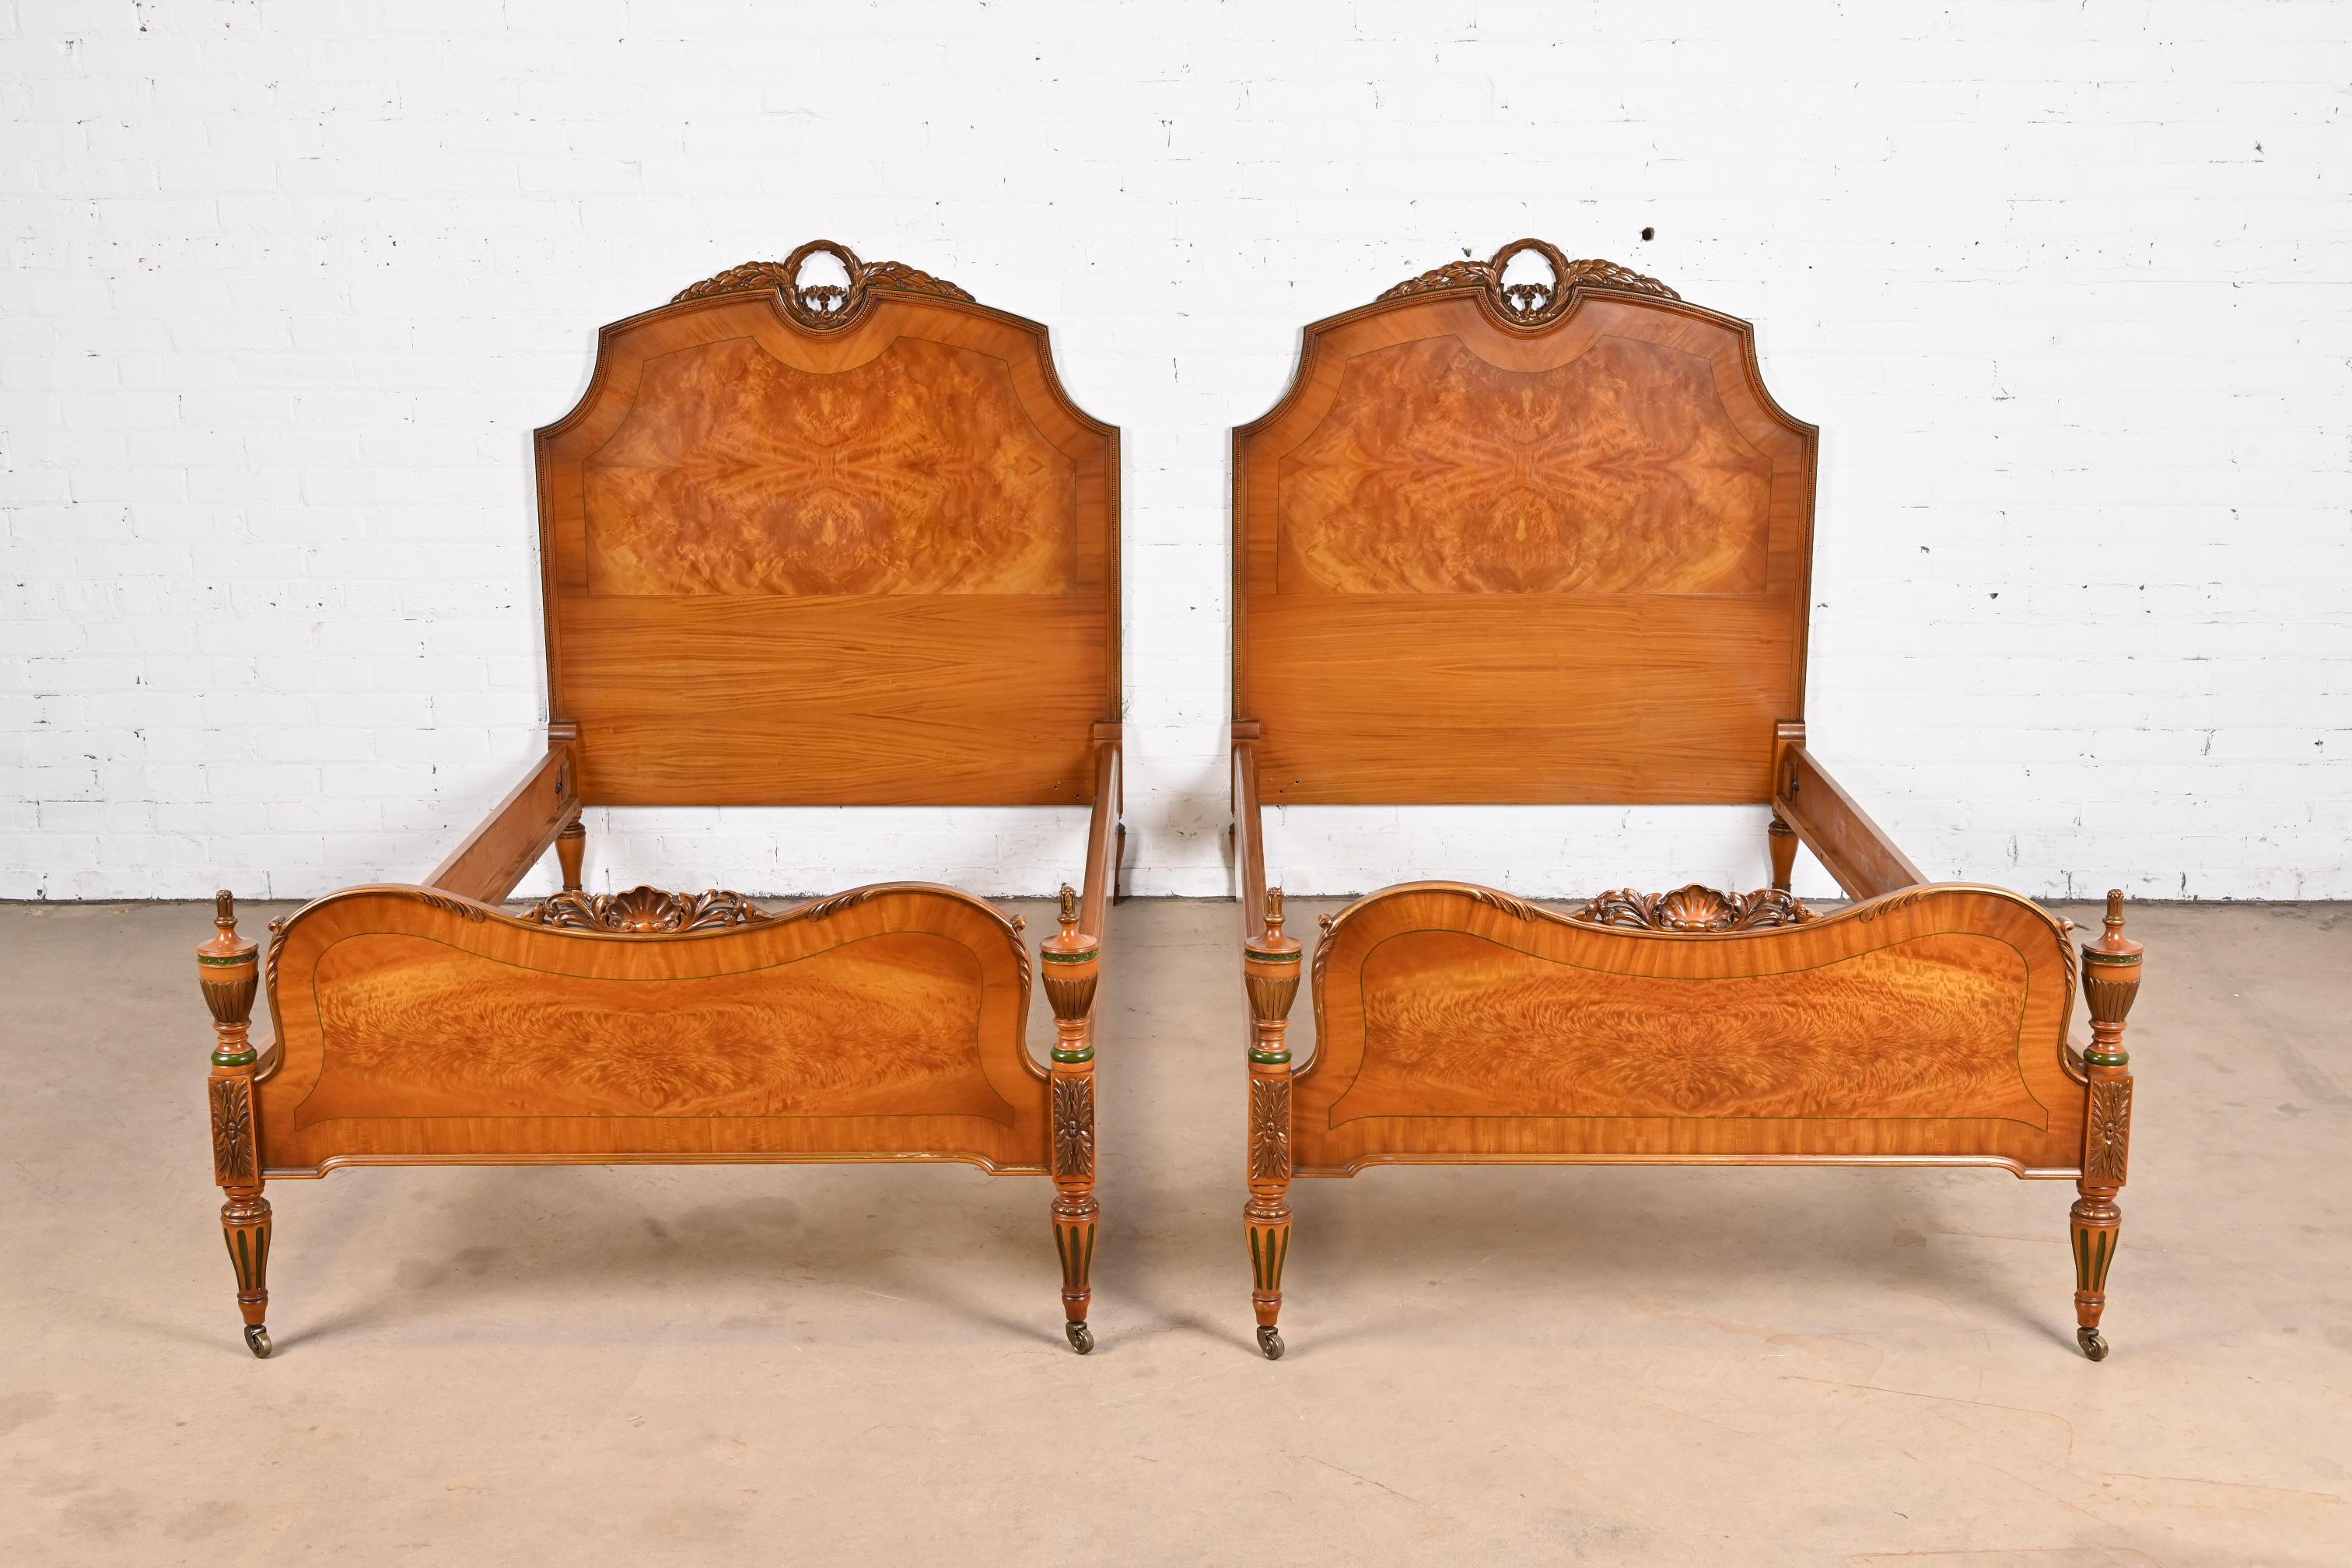 A gorgeous pair of French Regency Louis XVI style twin beds

In the manner of Romweber

USA, circa 1930s

Carved satinwood, with stunning inlaid burl wood, and green and gold painted details.

Each bed measures: 41.75